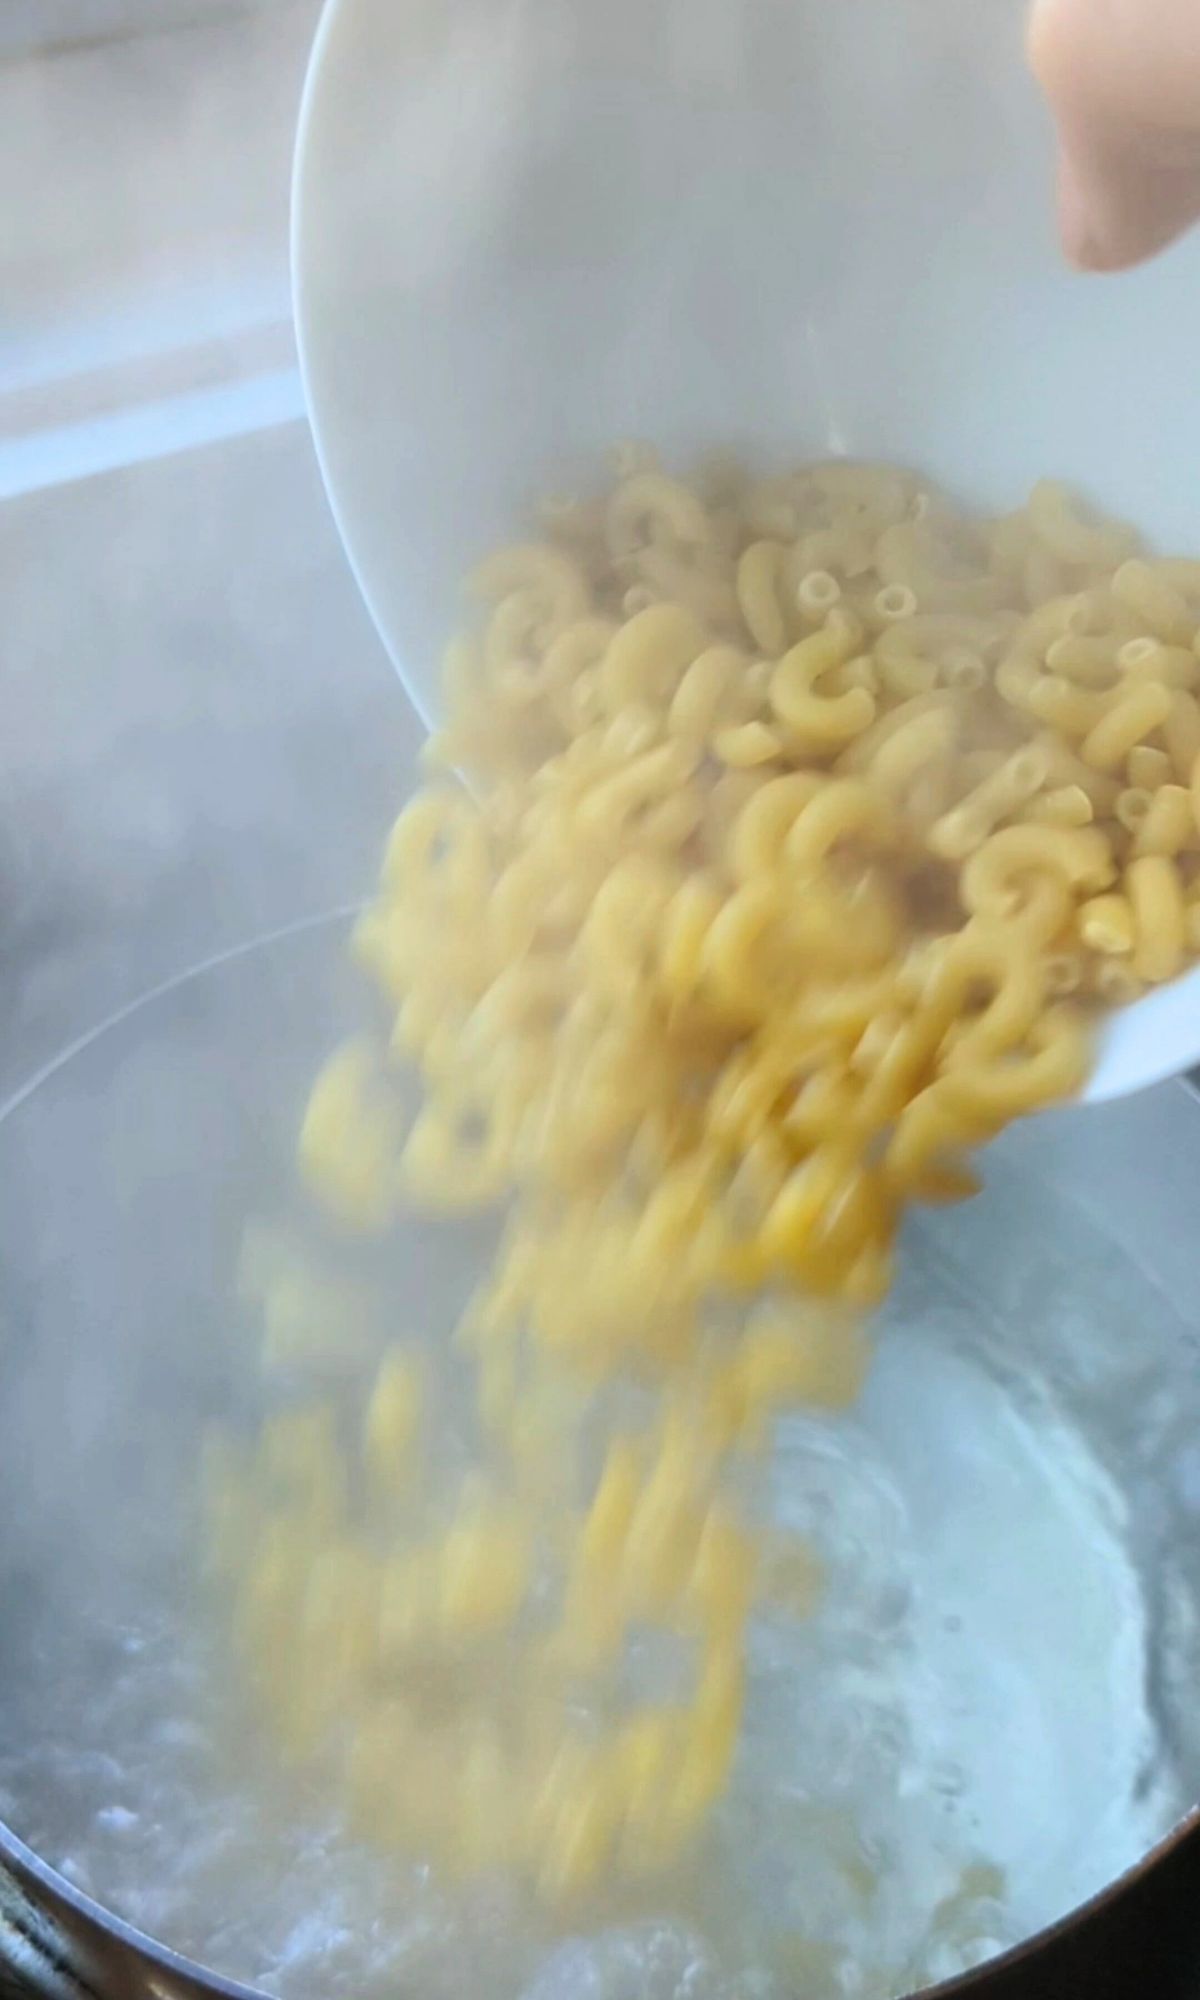 macaroni noodles being added to boiling water to cook the pasta for cacio e pepe.